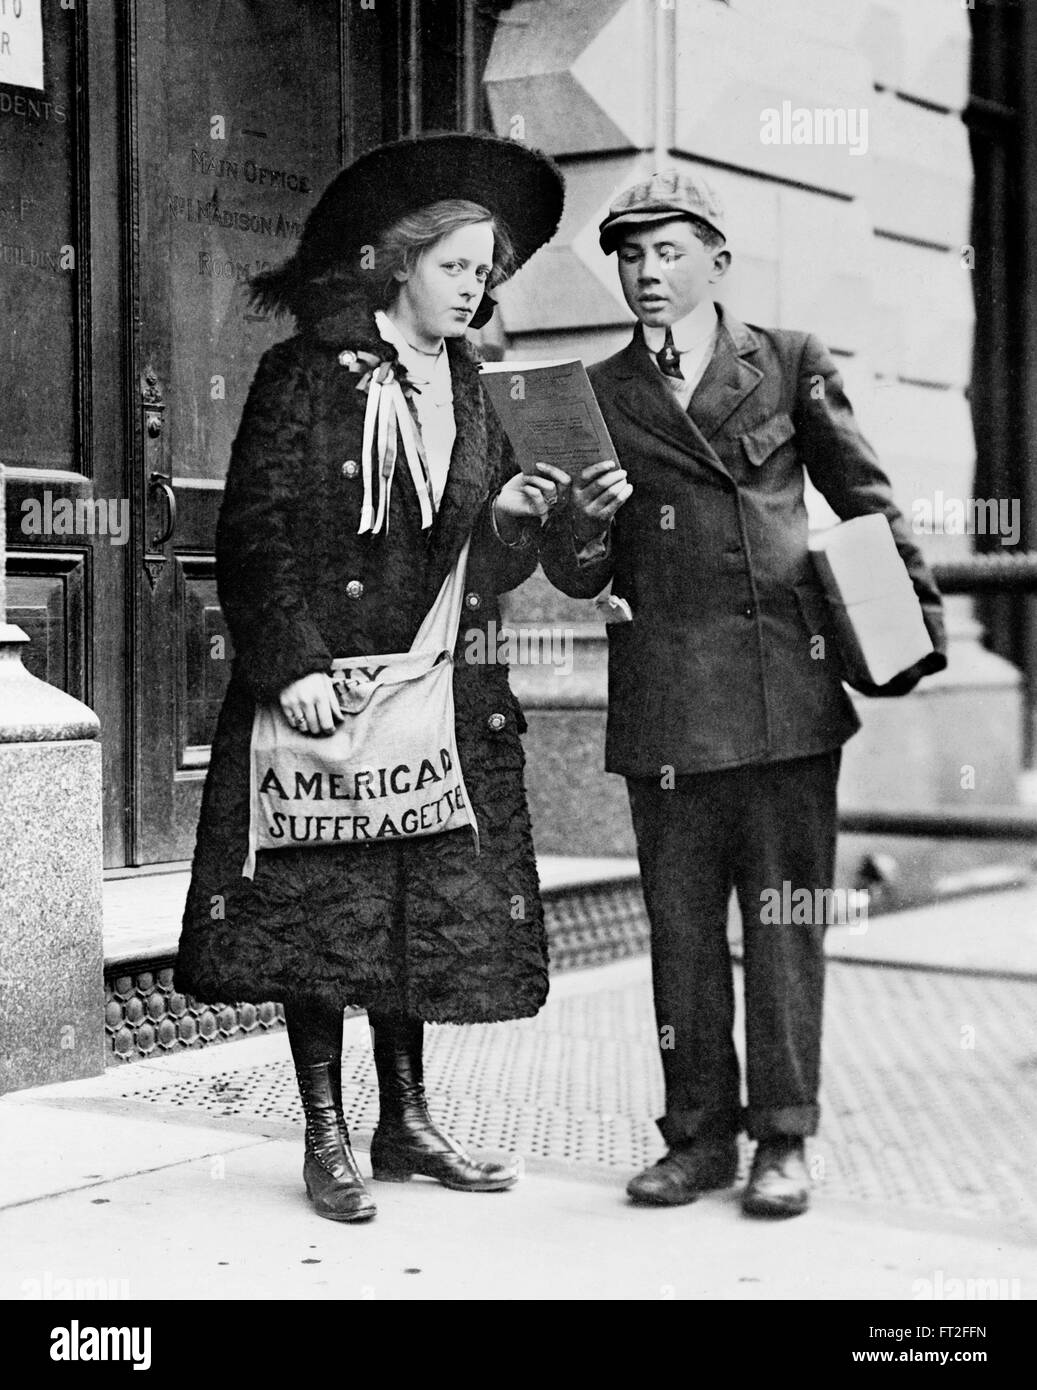 A young 19 year old American suffragette, Fay Hubbard, selling suffragette newspapers on the streets of New York, February 1910. Stock Photo